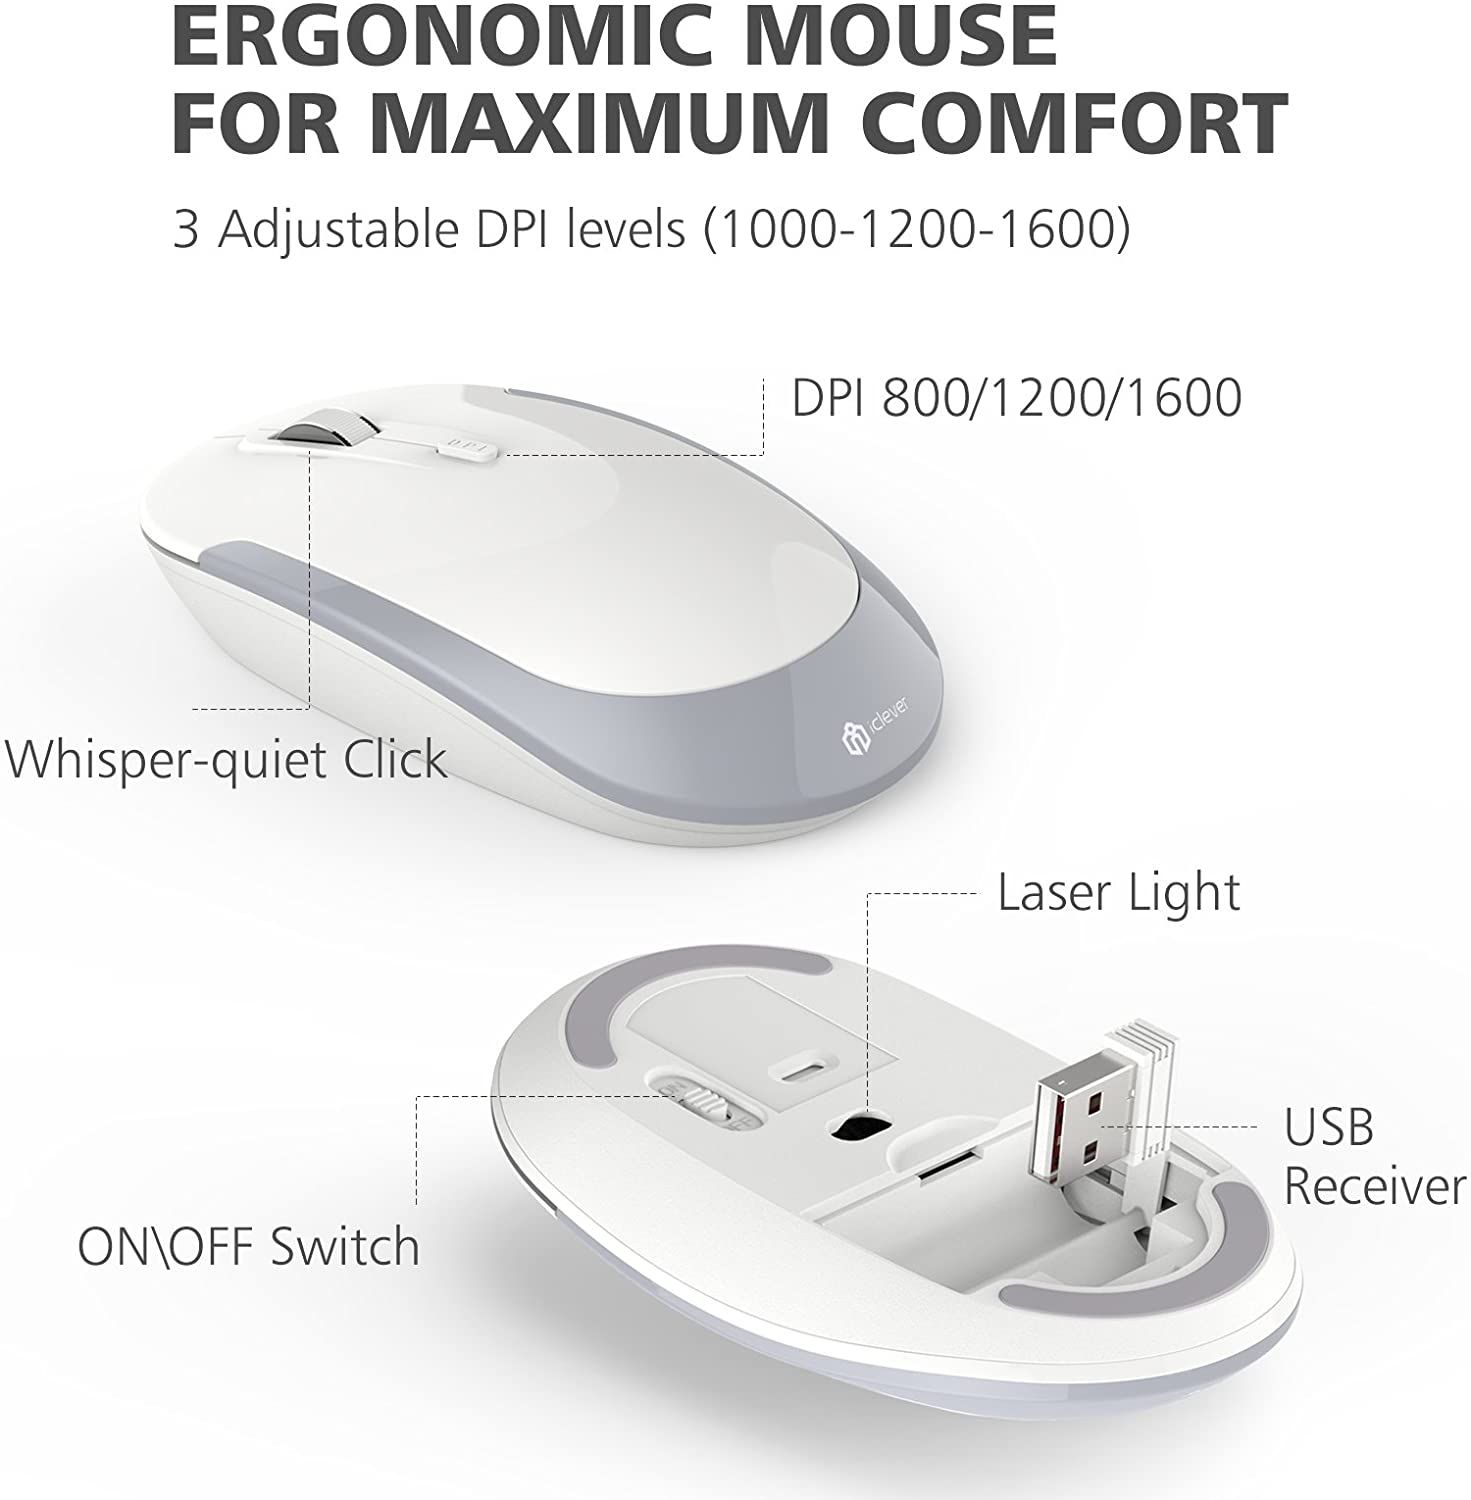 iClever GK03 mouse